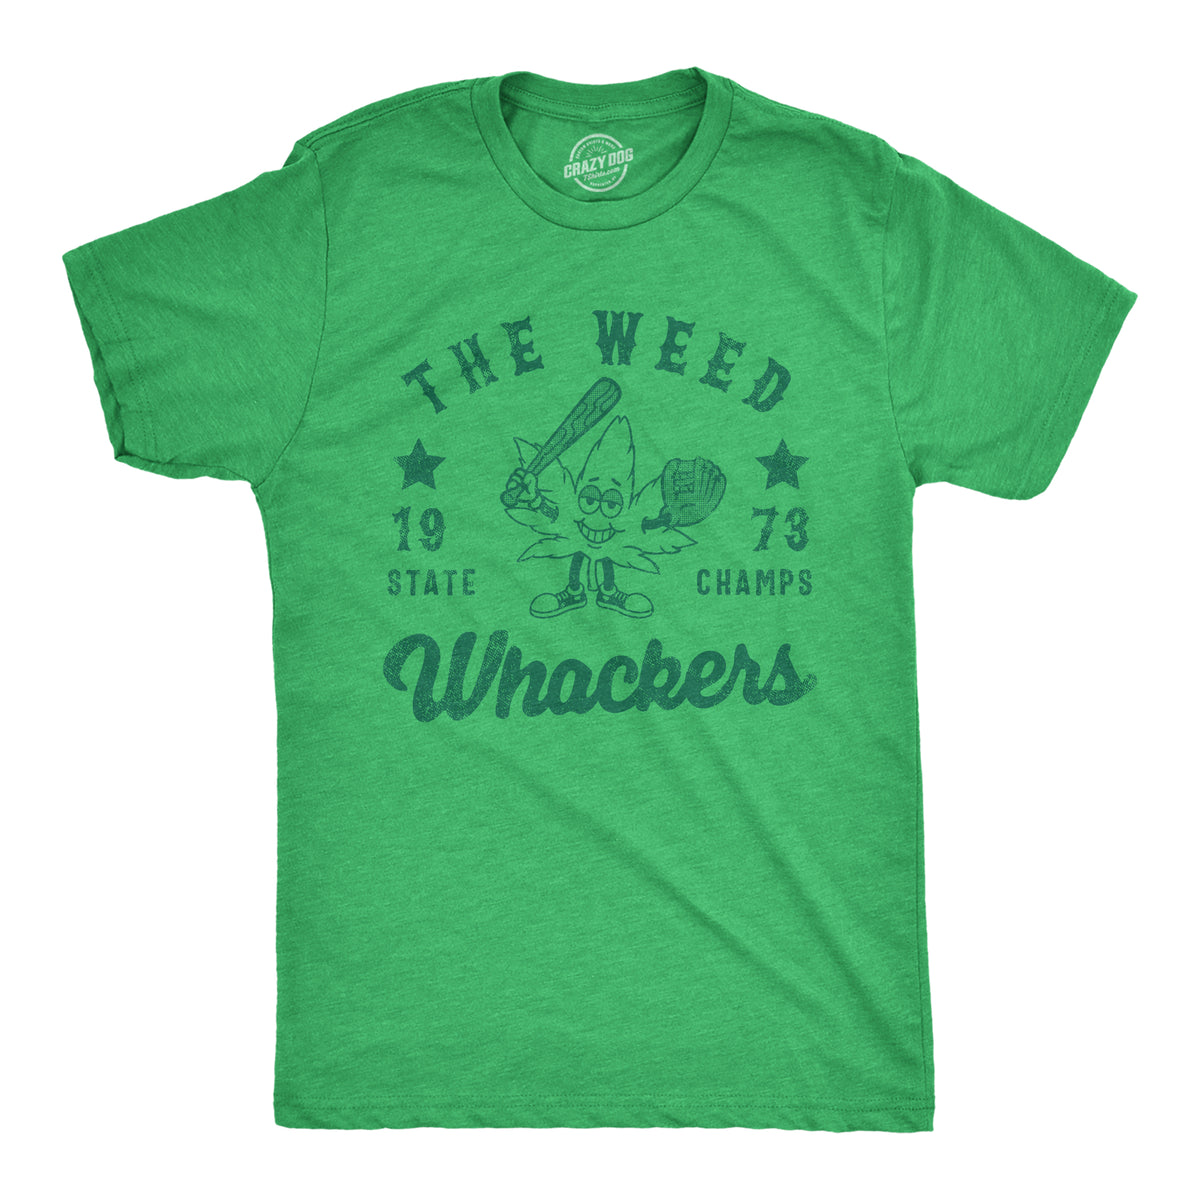 Funny Heather Green - WHACKERS The Weed Whackers State Champs Mens T Shirt Nerdy 420 Baseball sarcastic Tee